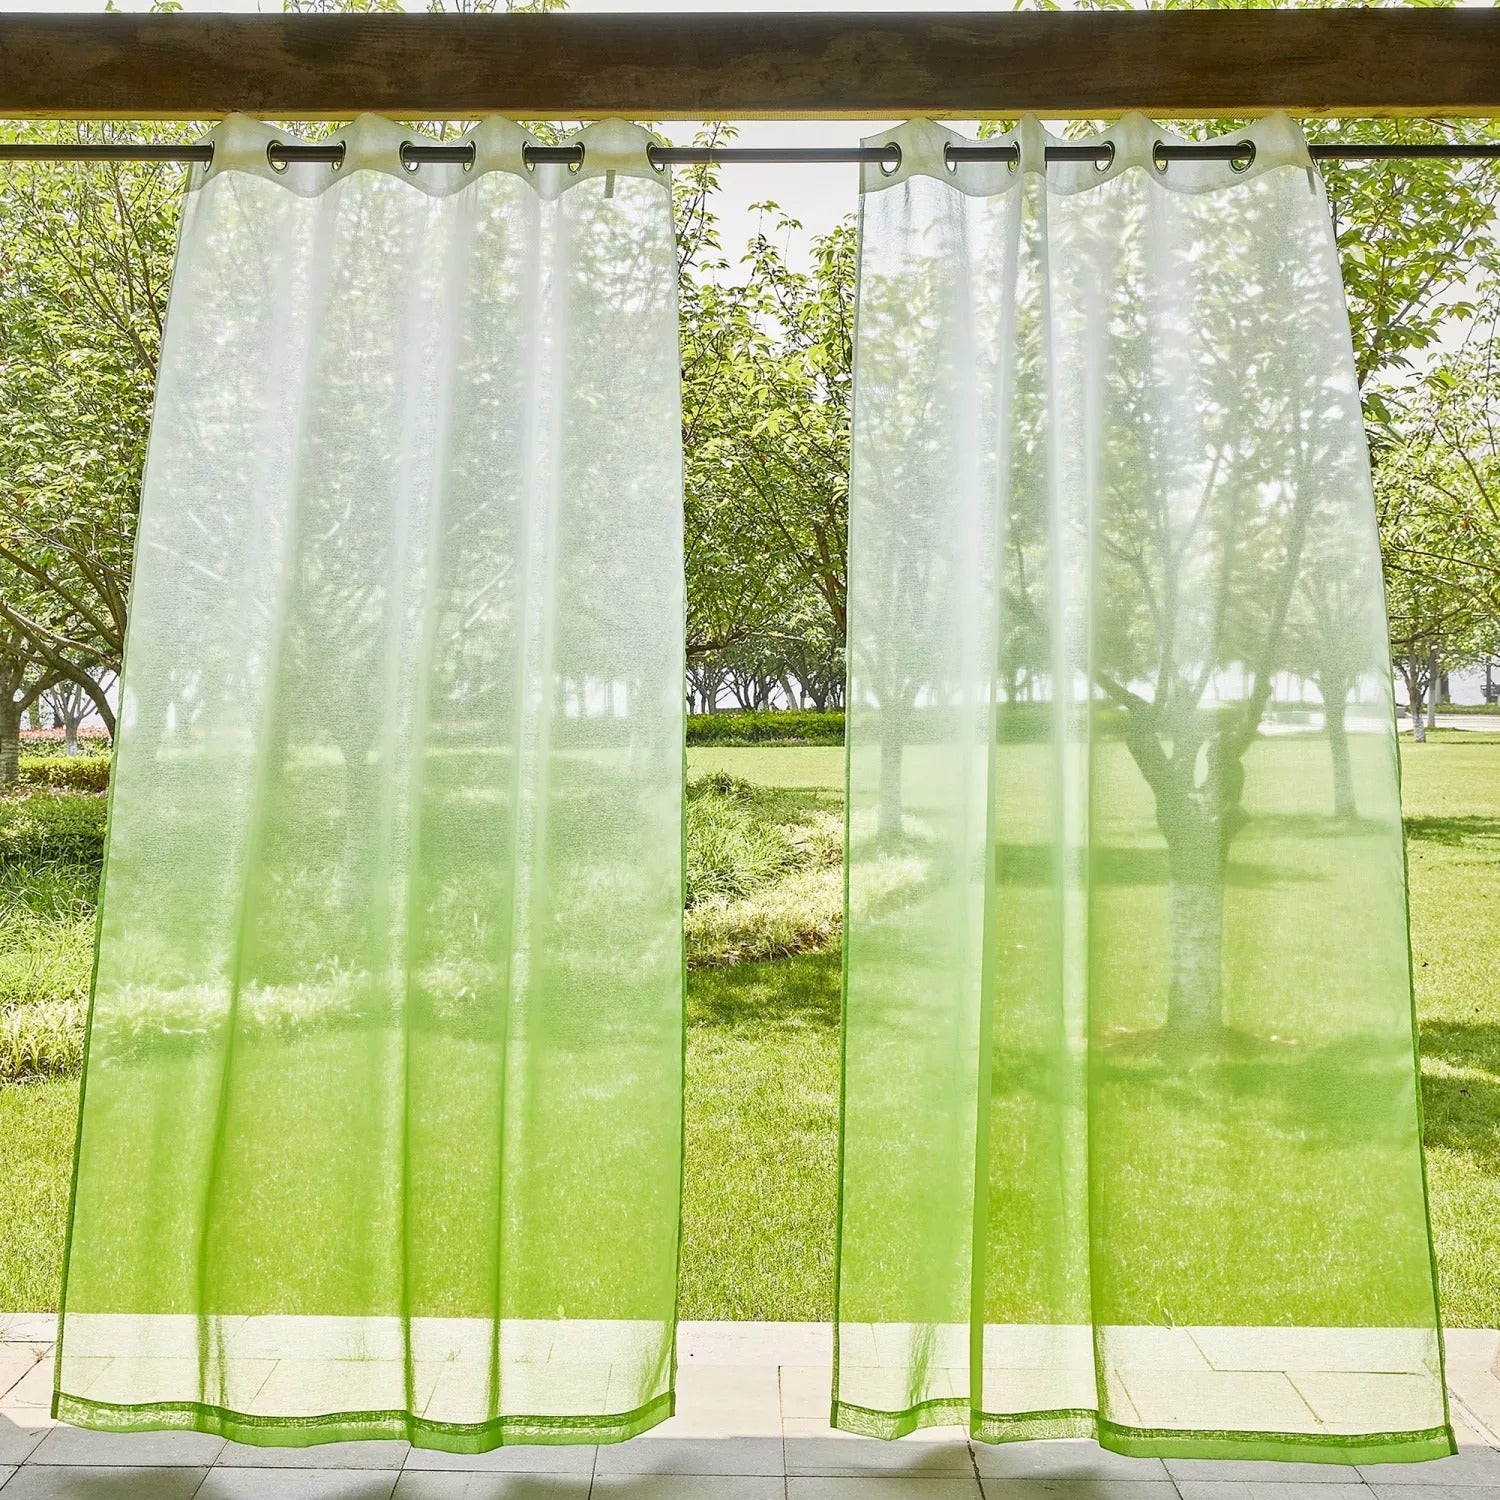 Ombre Grommet Privacy Decorative Outdoor Faux Linen Sheer Curtains For Patio, Gazebo, Pergola  2 Panels KGORGE Store